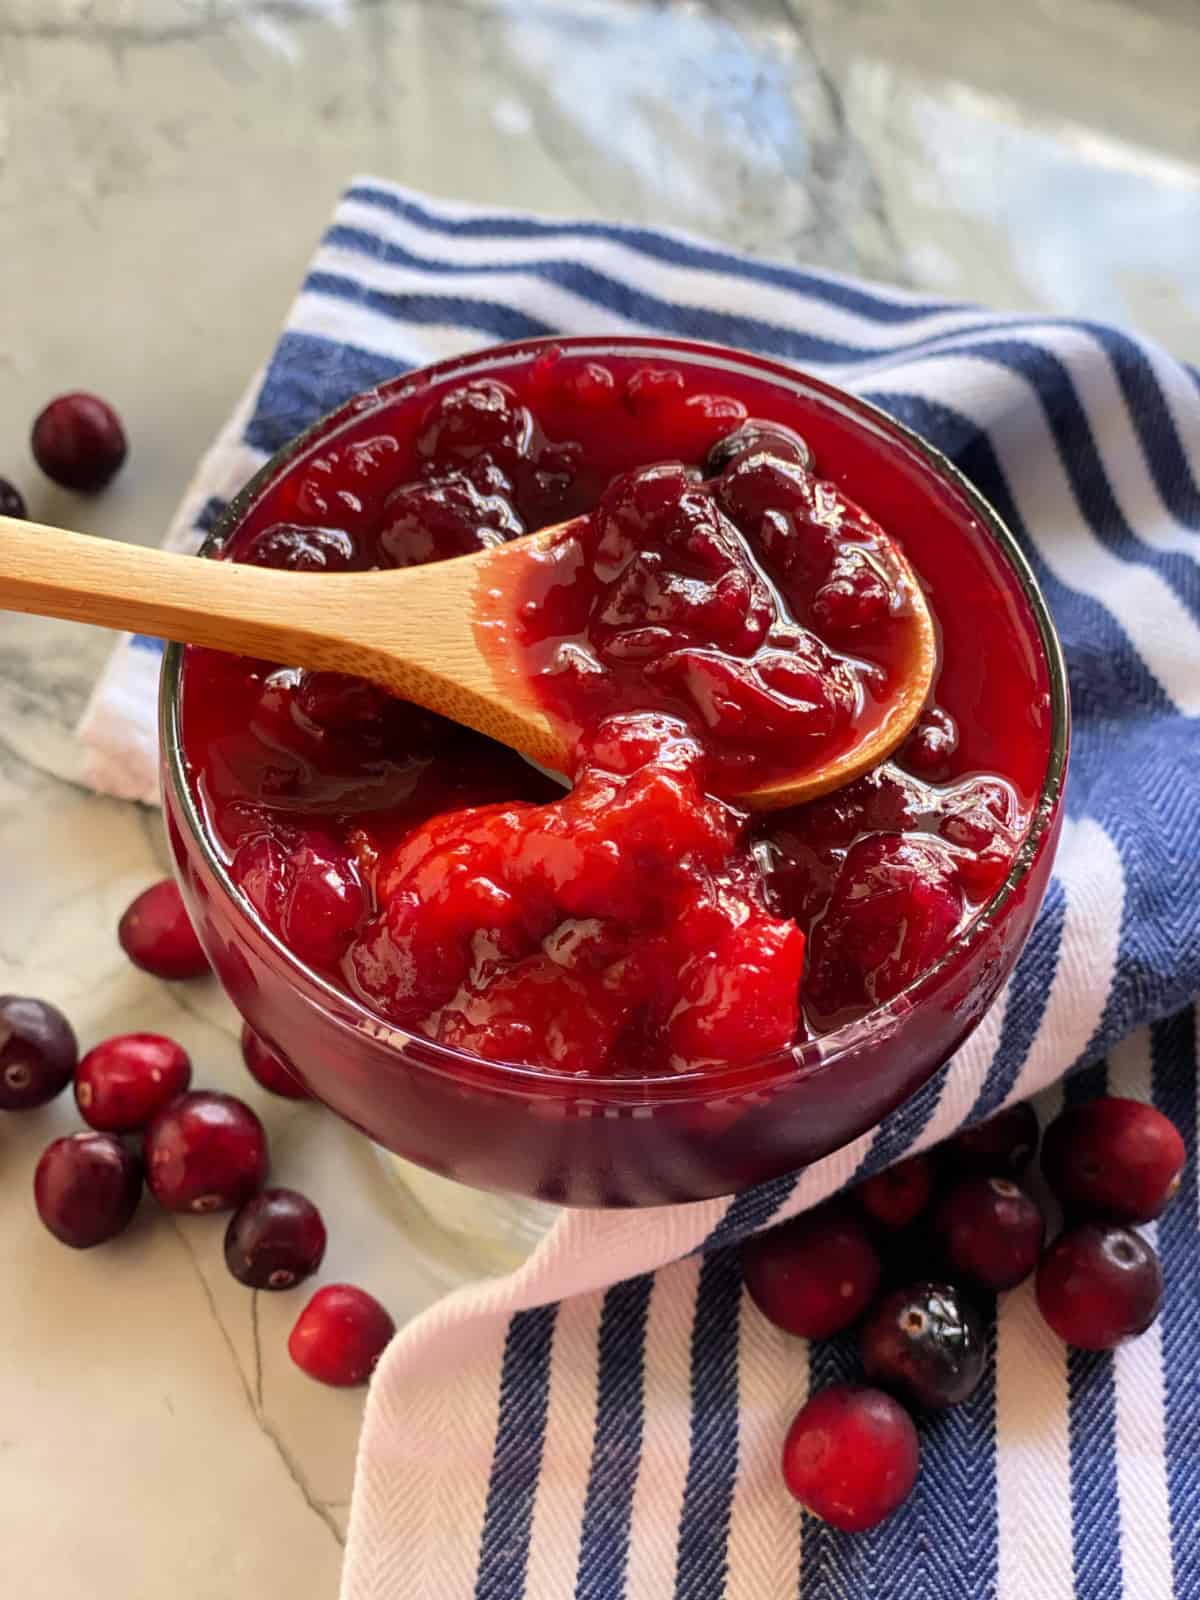 Wooden spoonin a glass bowl filled with cranberry sauce.